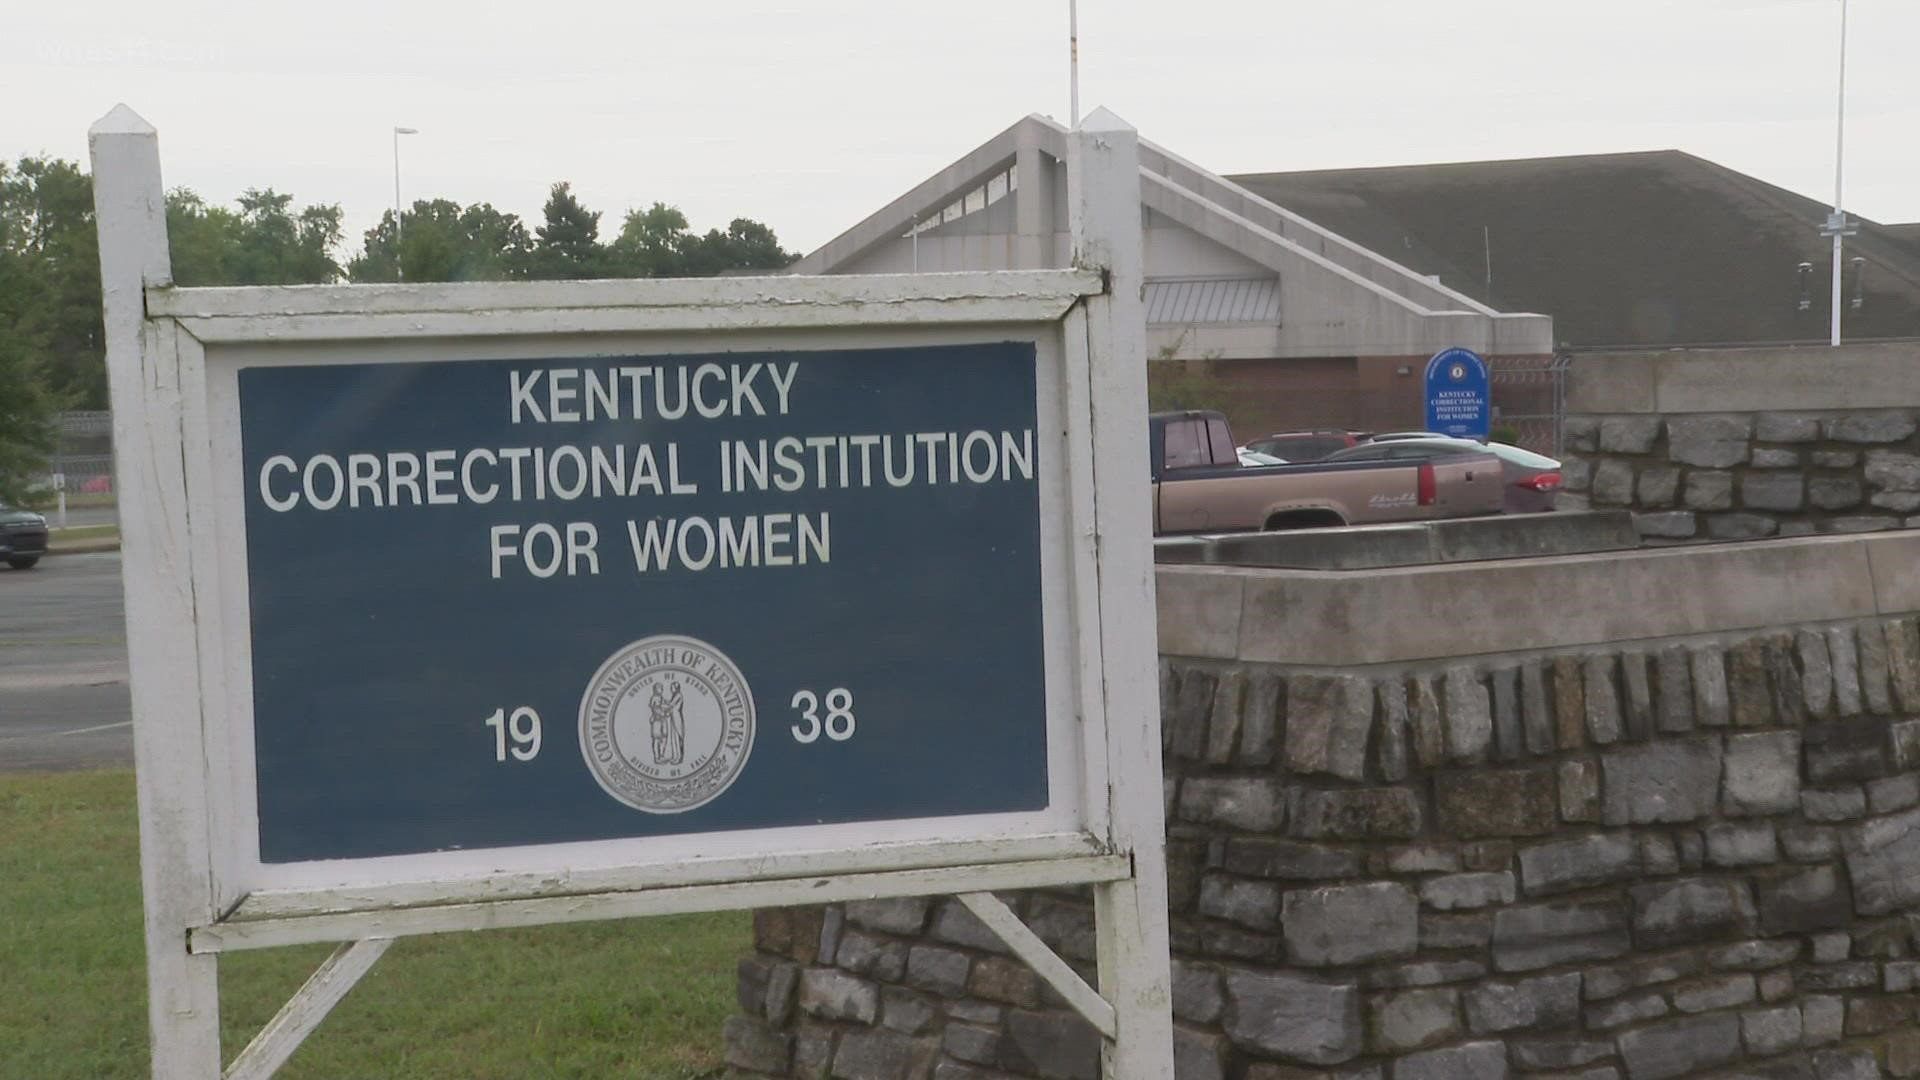 Families of loved ones inside the Kentucky Correctional Institution for women said they have been without lights and air conditioning since last Thursday.